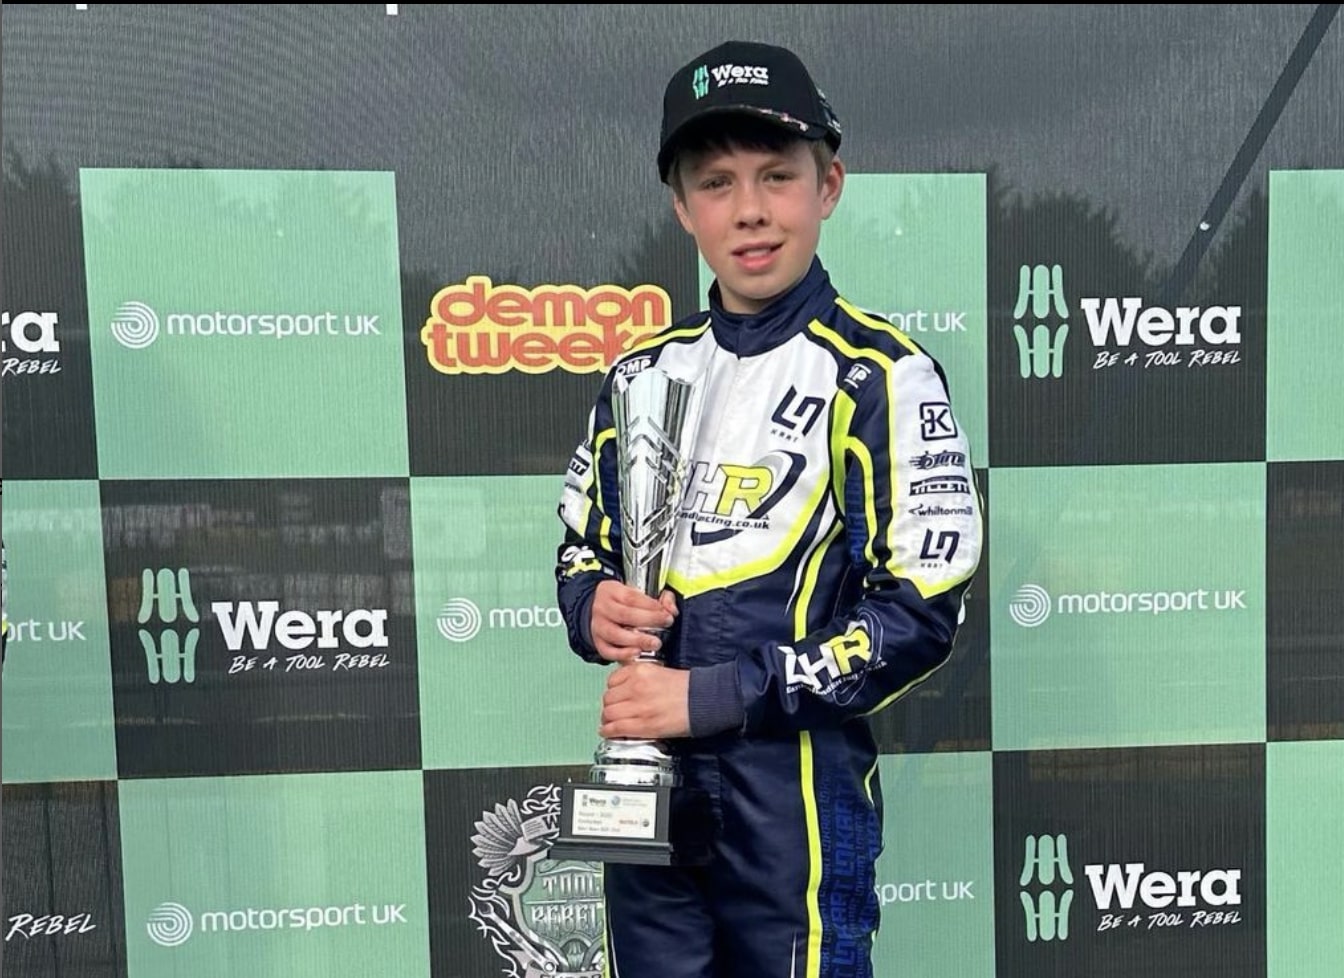 jacob-ashcroft:-the-kid-racer-with-potential